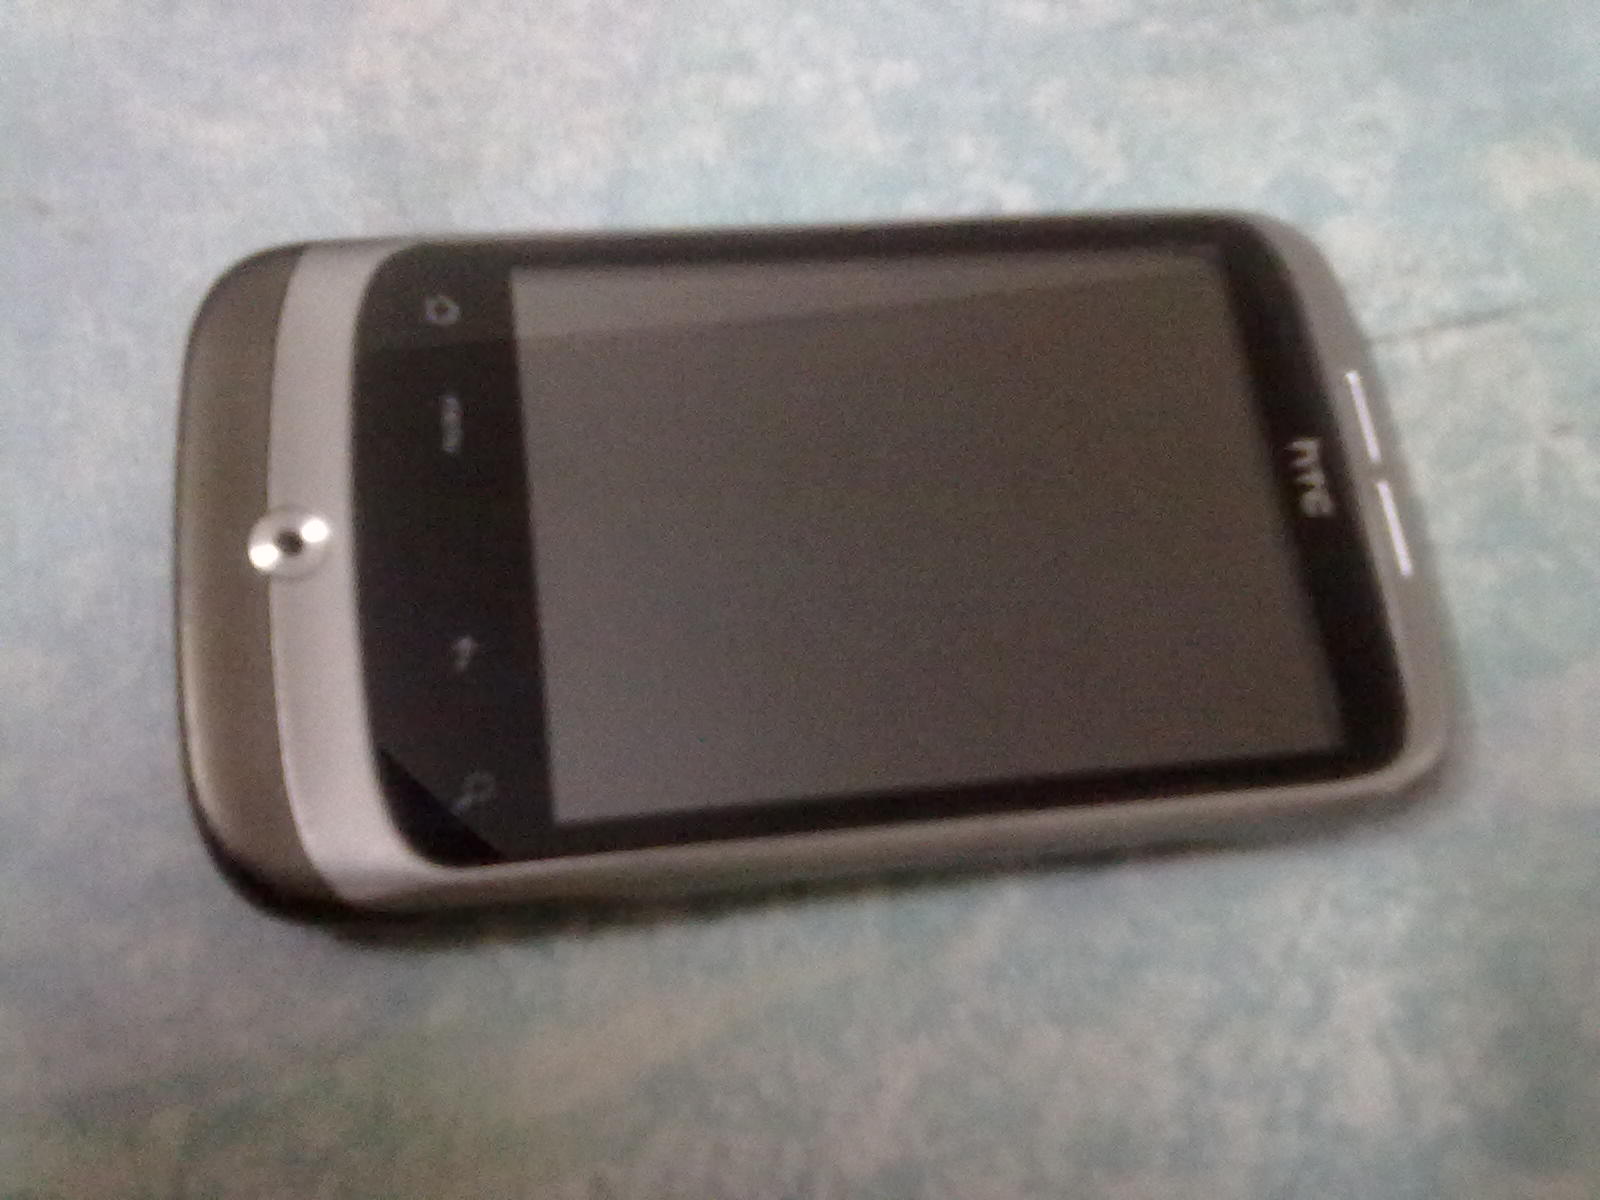 HTC WILDFIRE..ORIGINAL TAIWAN..FROM ITALY VODAFONE  large image 0